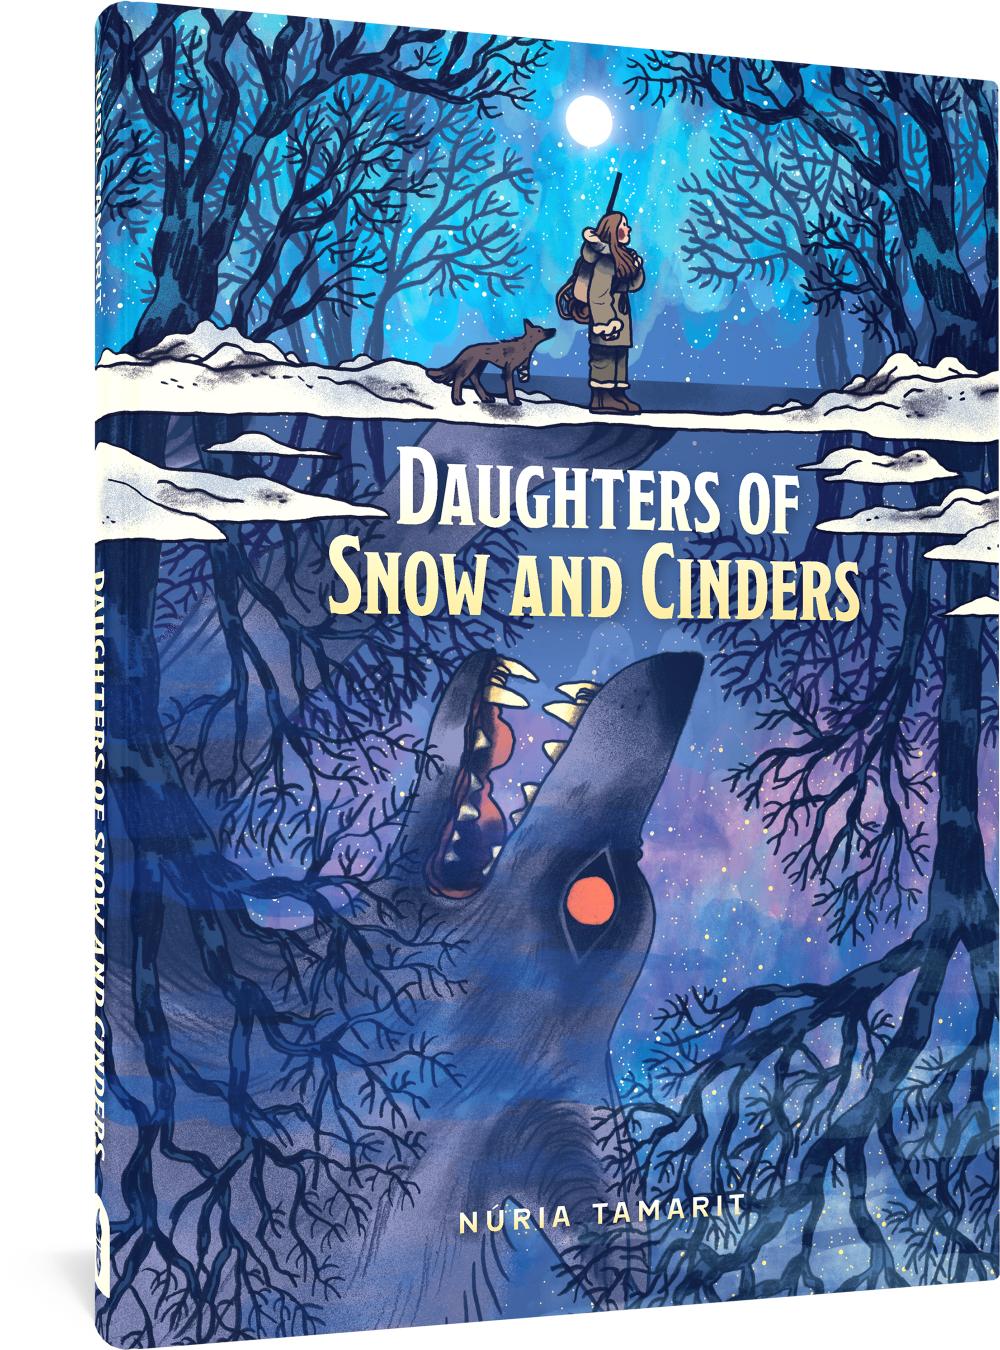 Daughters of Snow and Cinders (Hardcover)